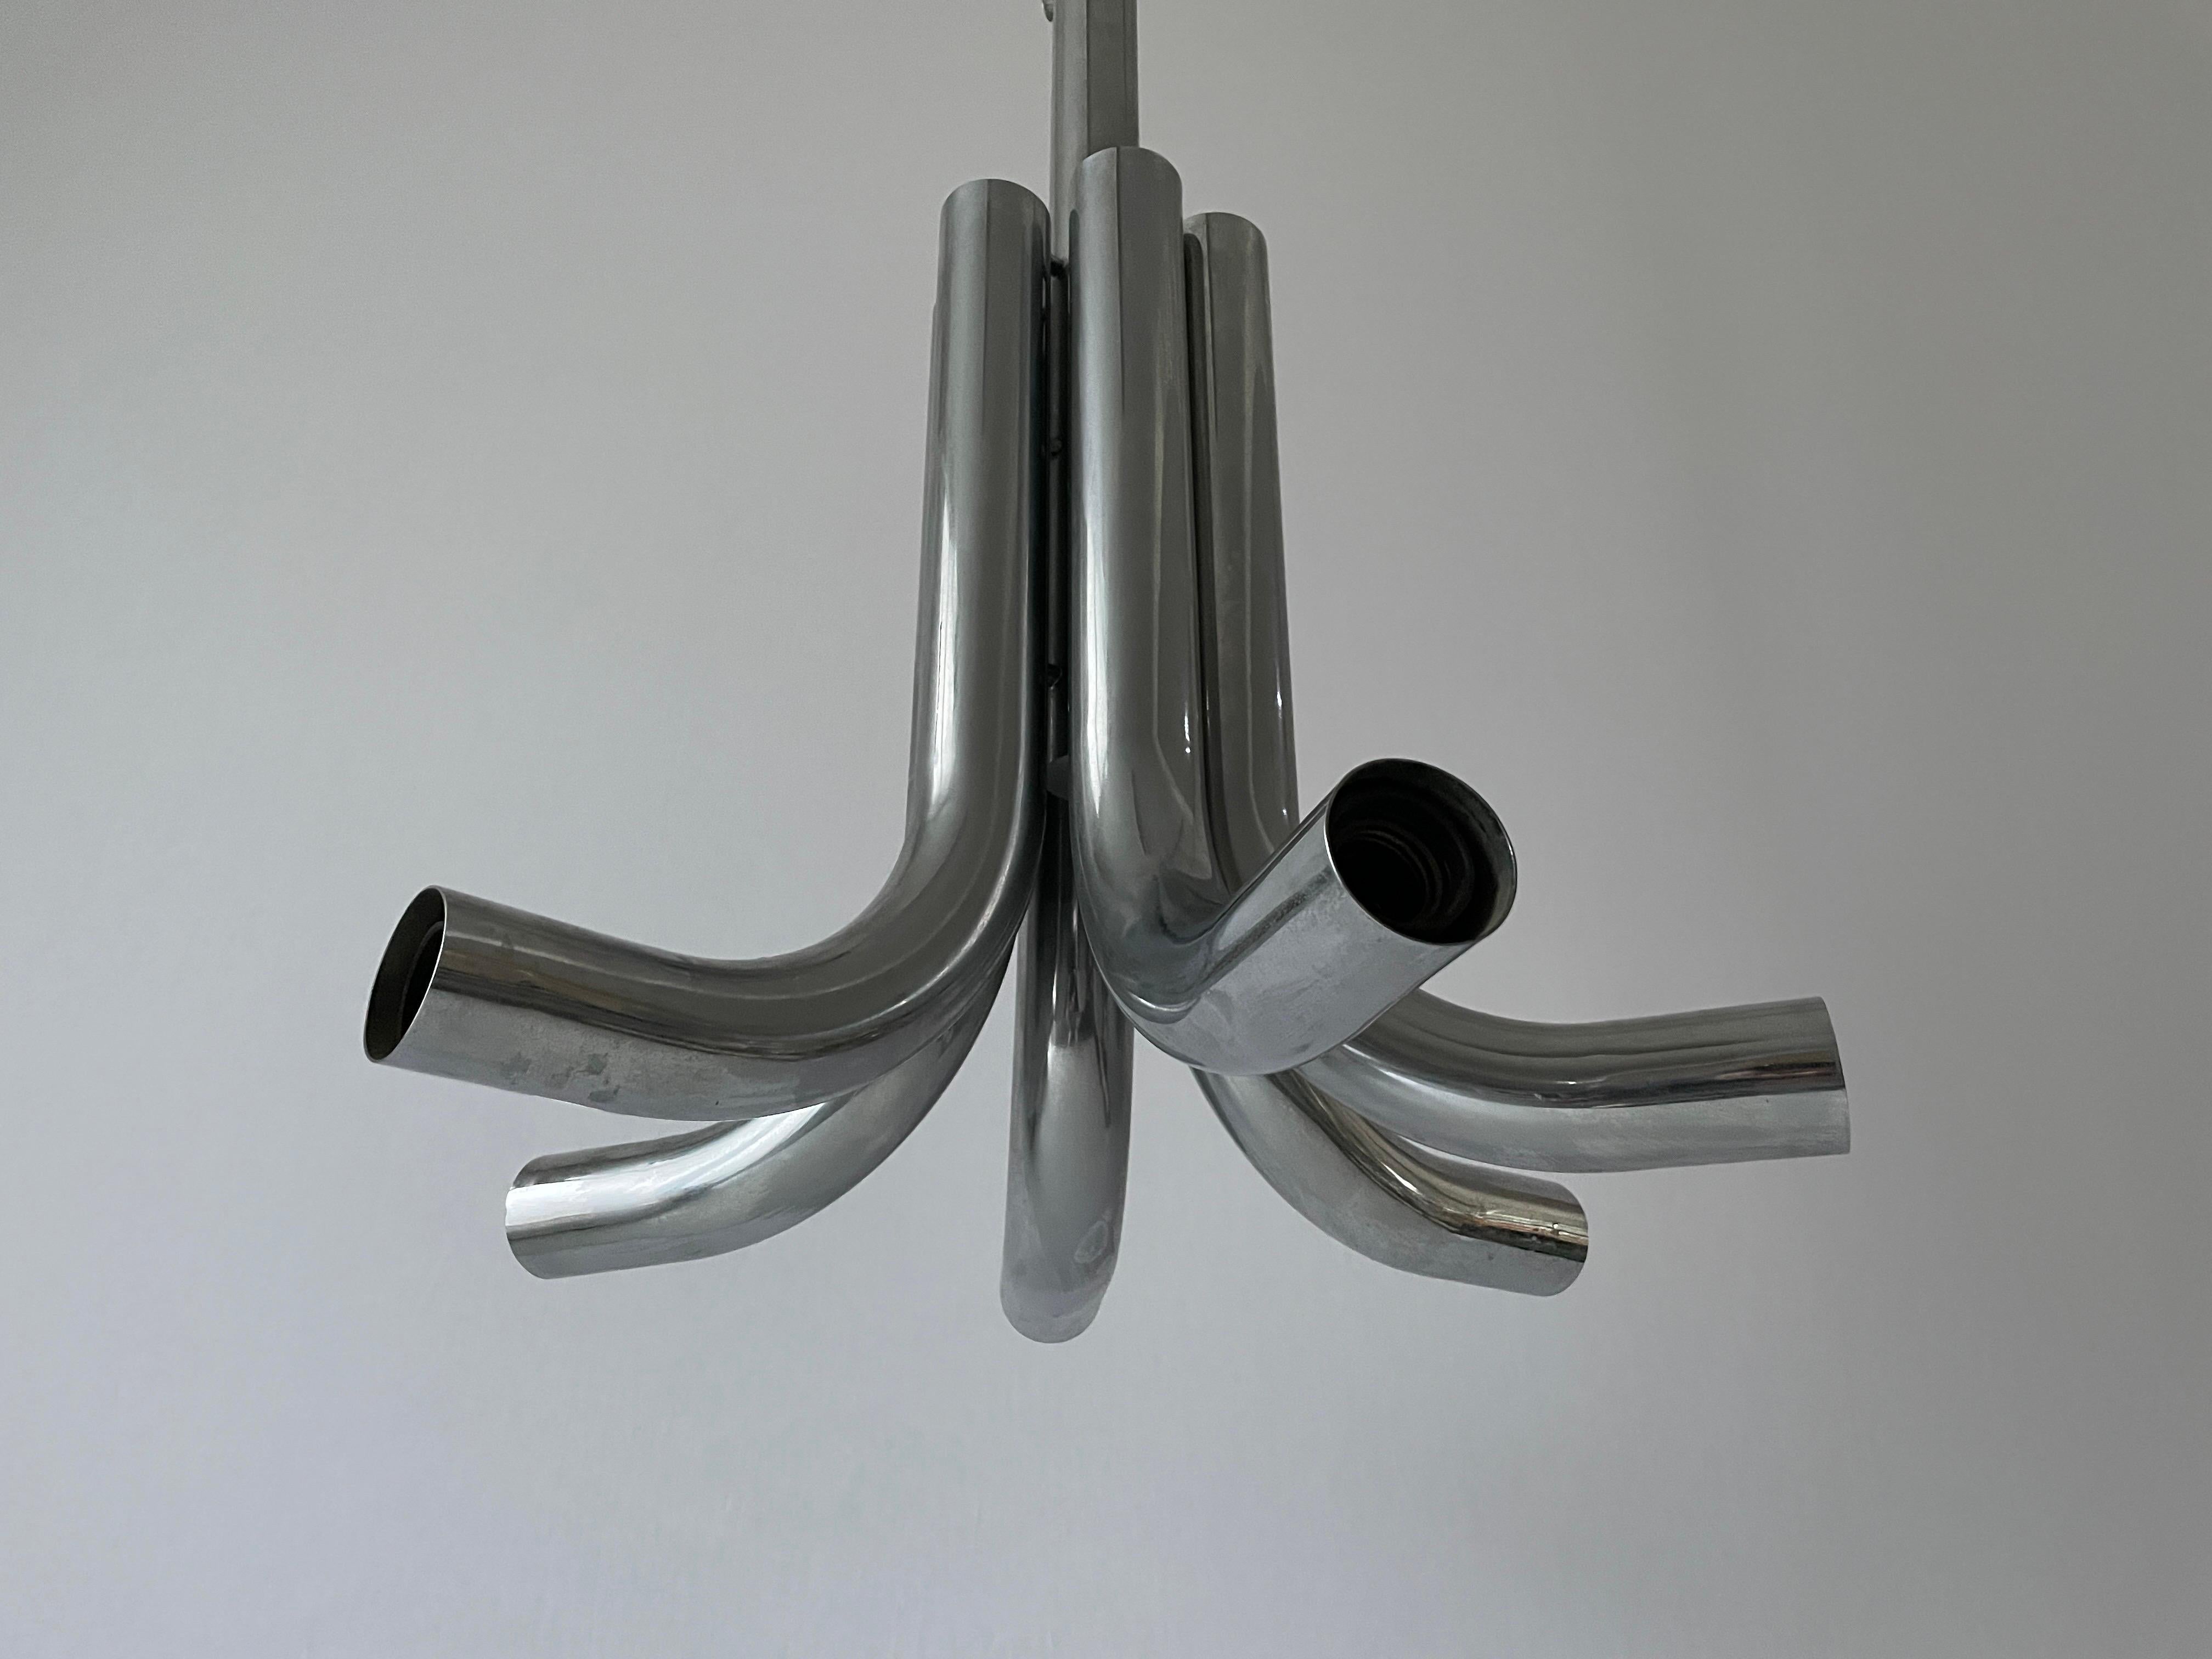 6-Tubular Design Chrome Chandelier by Stilux Milano, 1960s, Italy

This lamp works with 12x E27 light bulb.
Wired and suitable to use 110-220V in all countries.
Please do not hesitate to ask us for any type of questions.

Measurements:
Height: 102